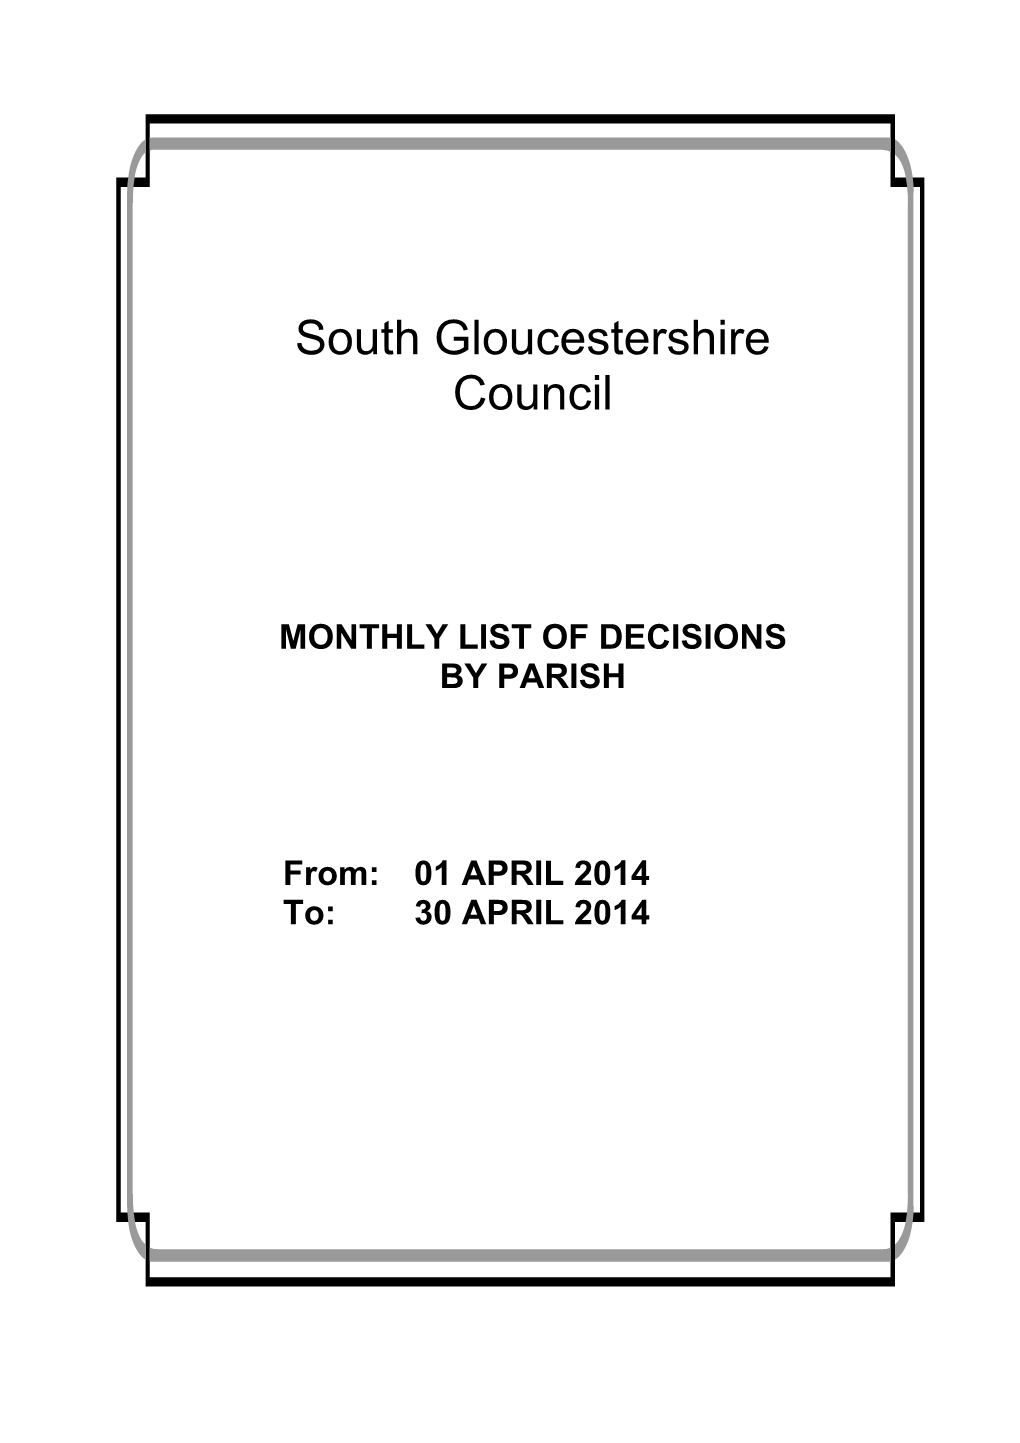 MONTHLY LIST of DECISIONS by PARISH From: 01 APRIL 2014 To